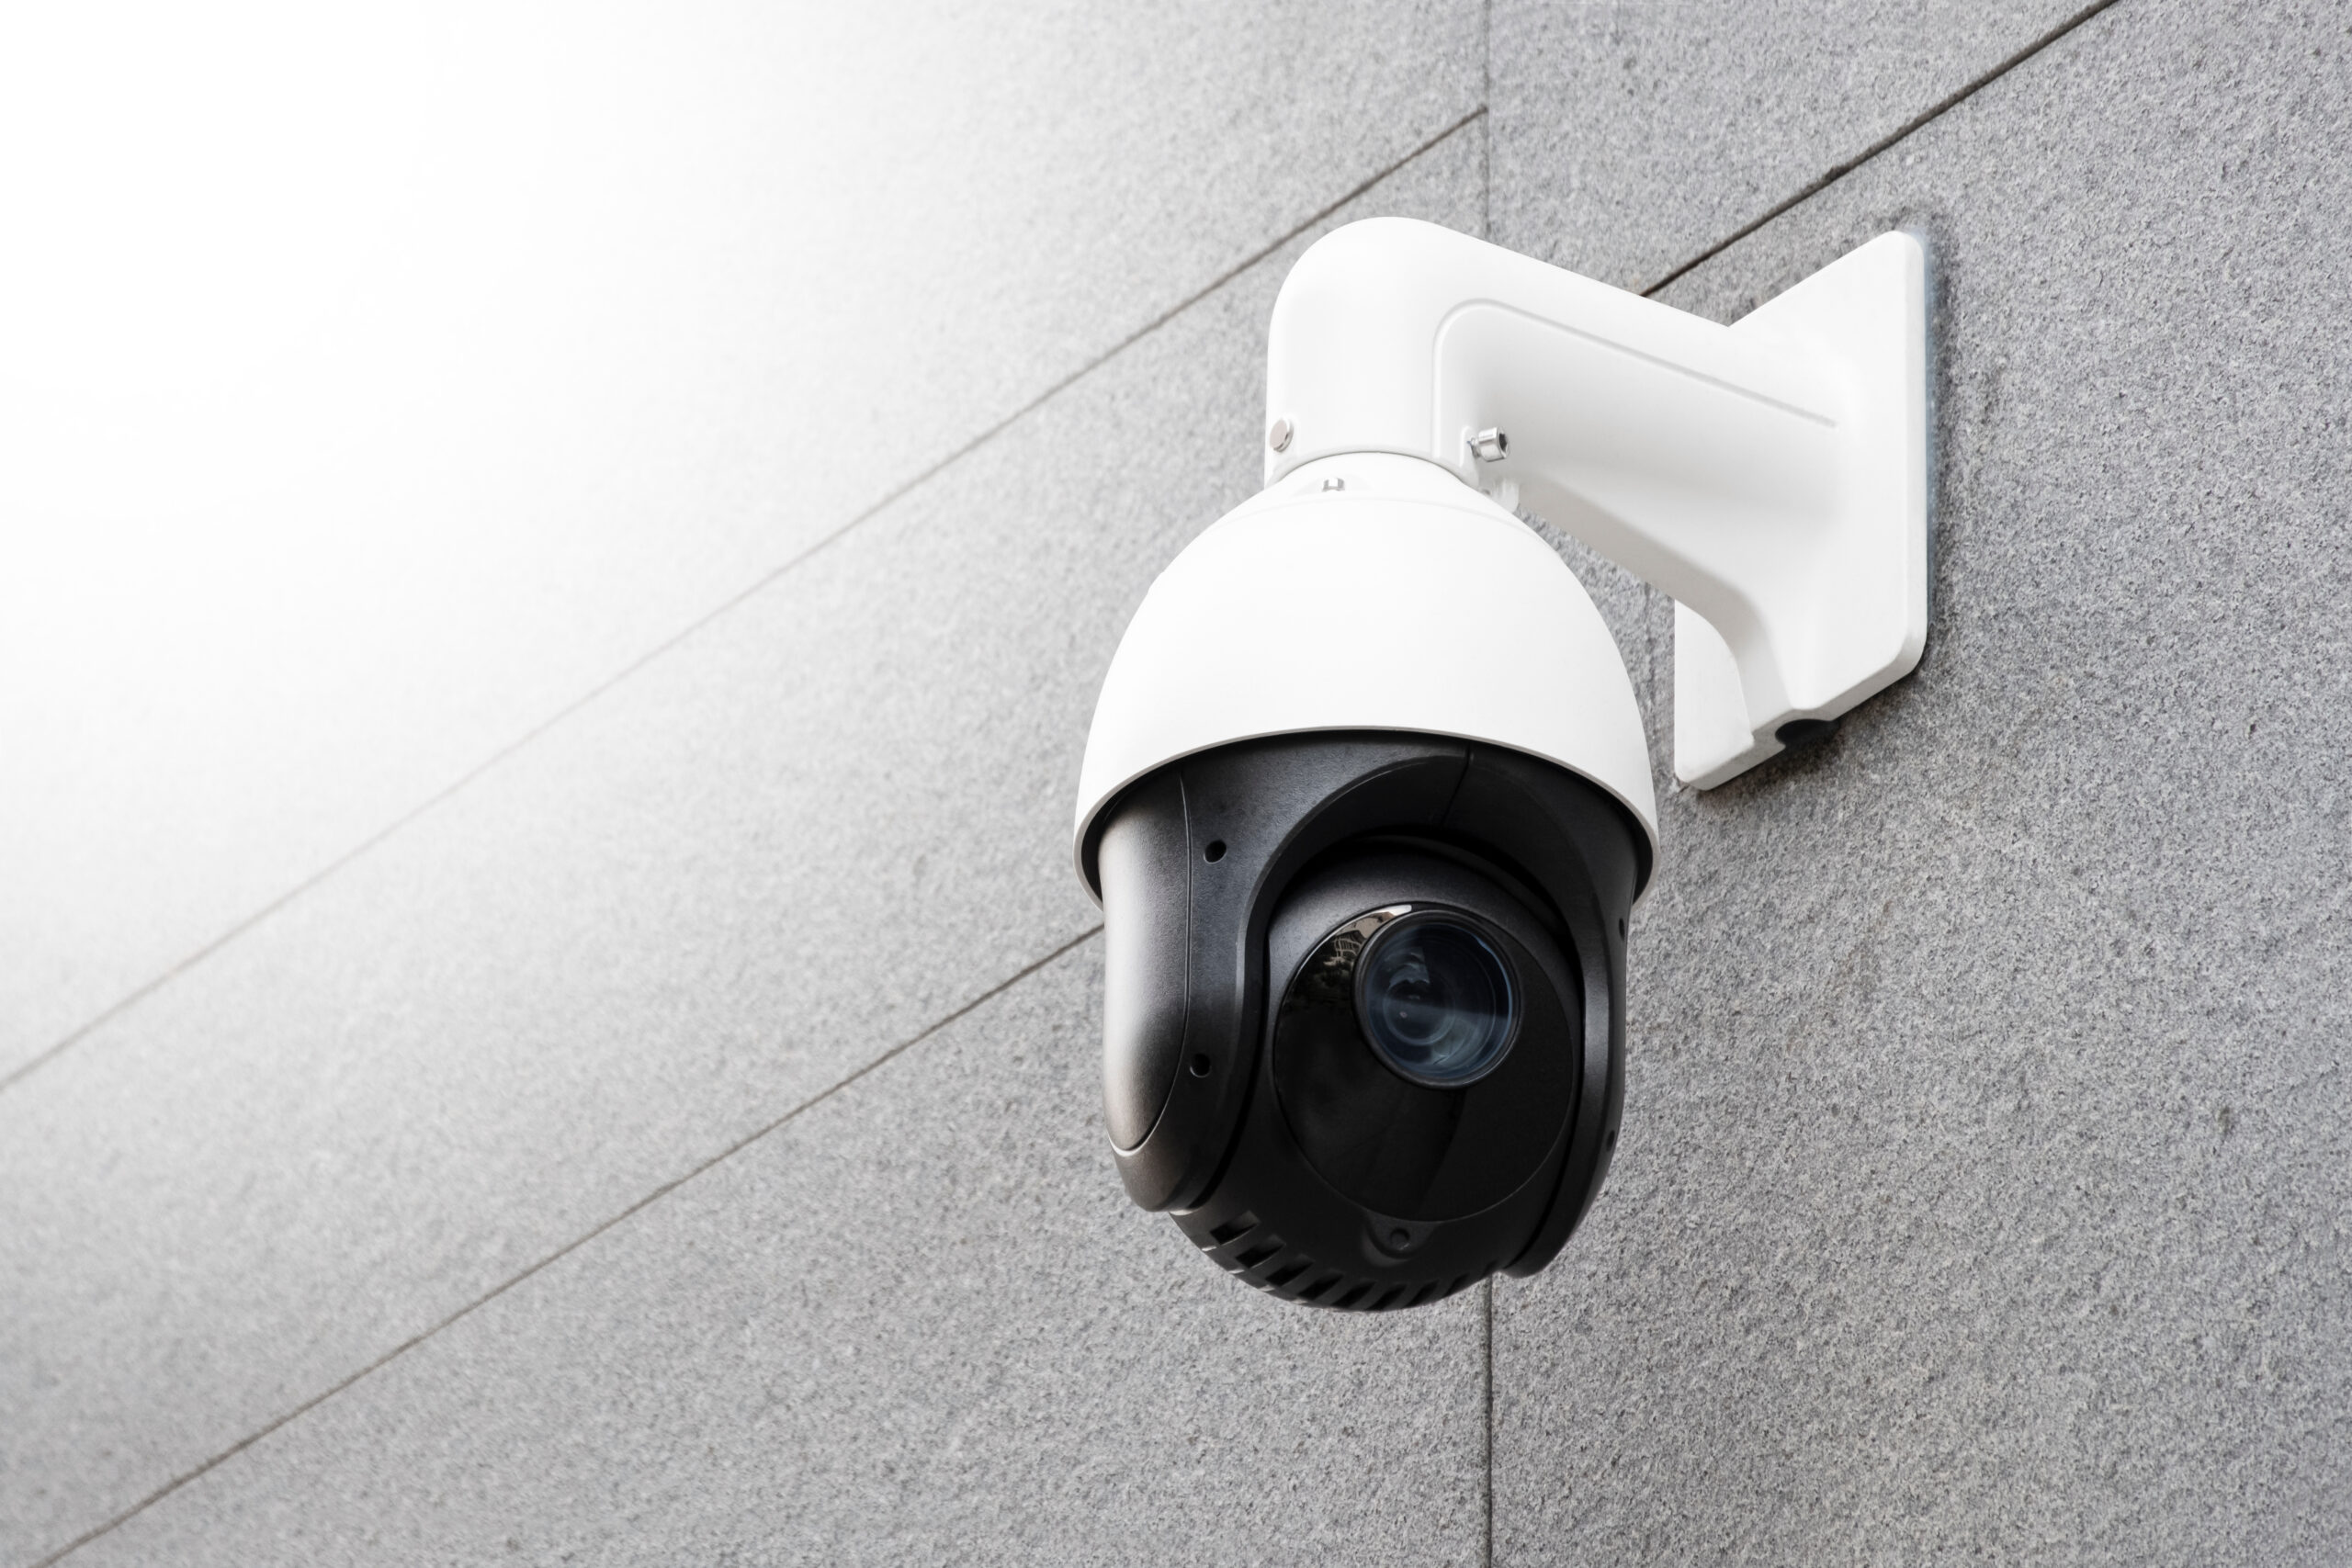 Will my business benefit from installing video surveillance?